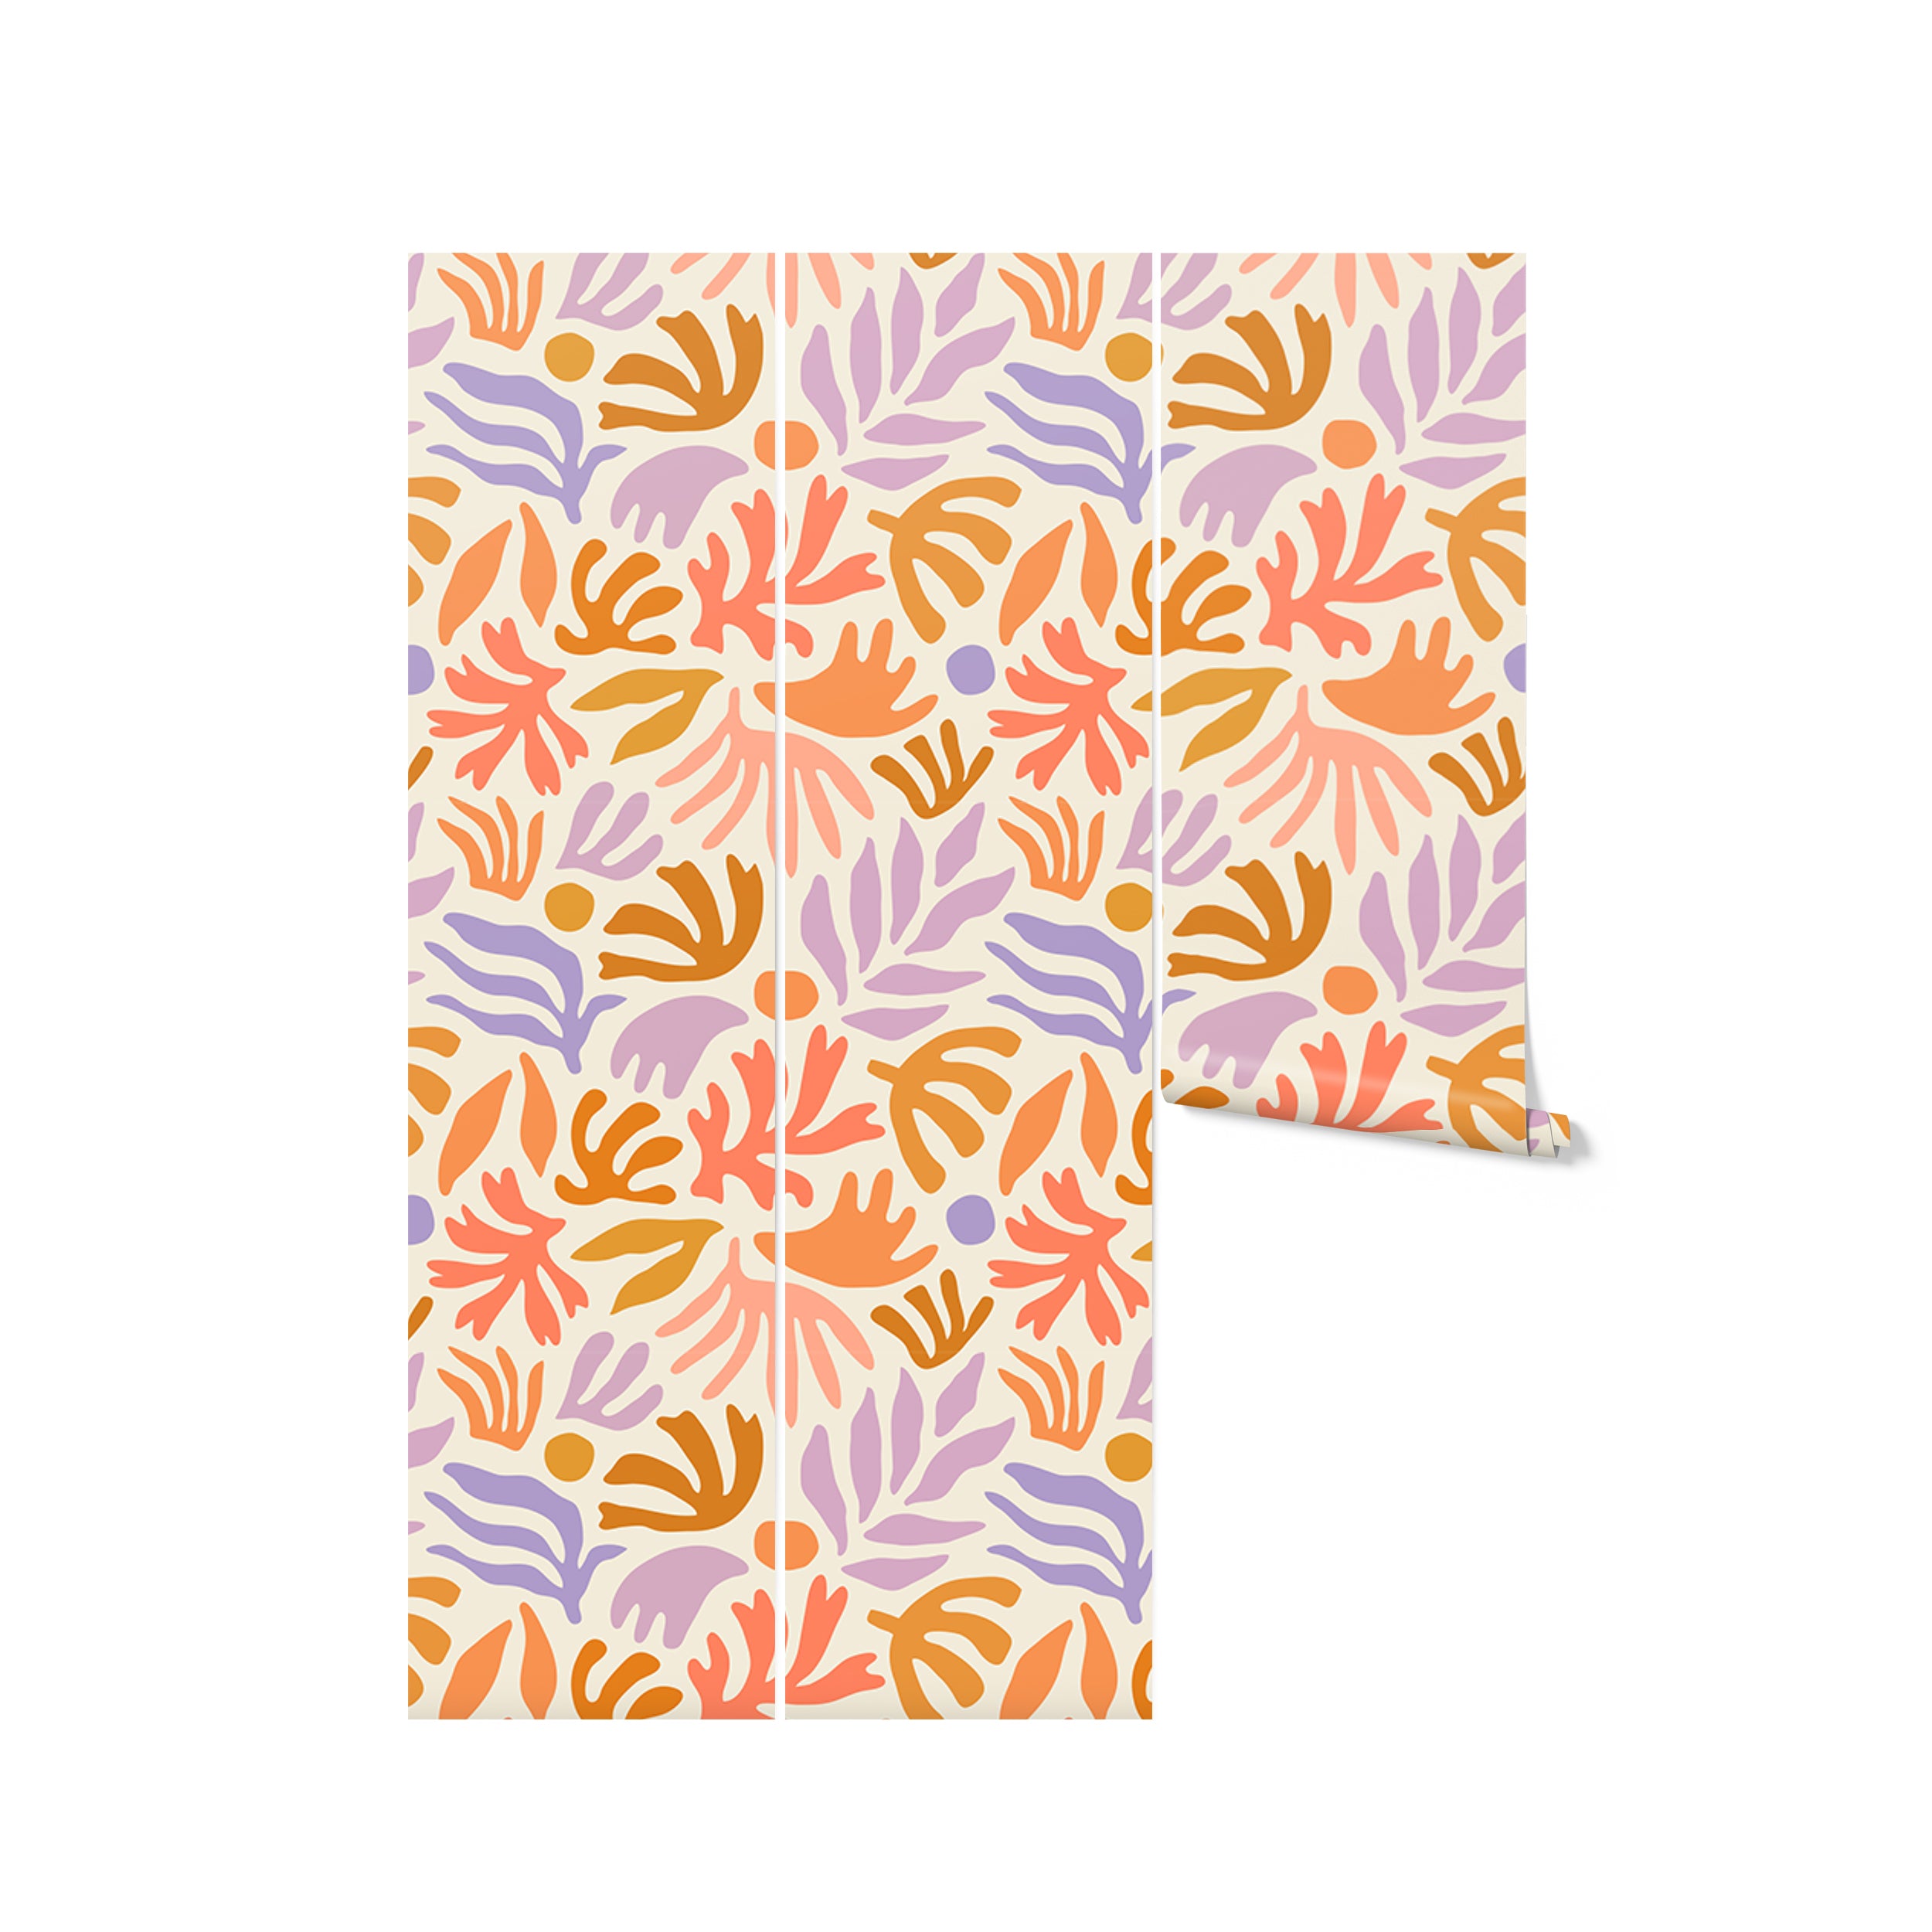 Three folded wallpaper panels on a white background, displaying a playful pattern with stylized flora in a color palette of cream, purple, orange, and yellow